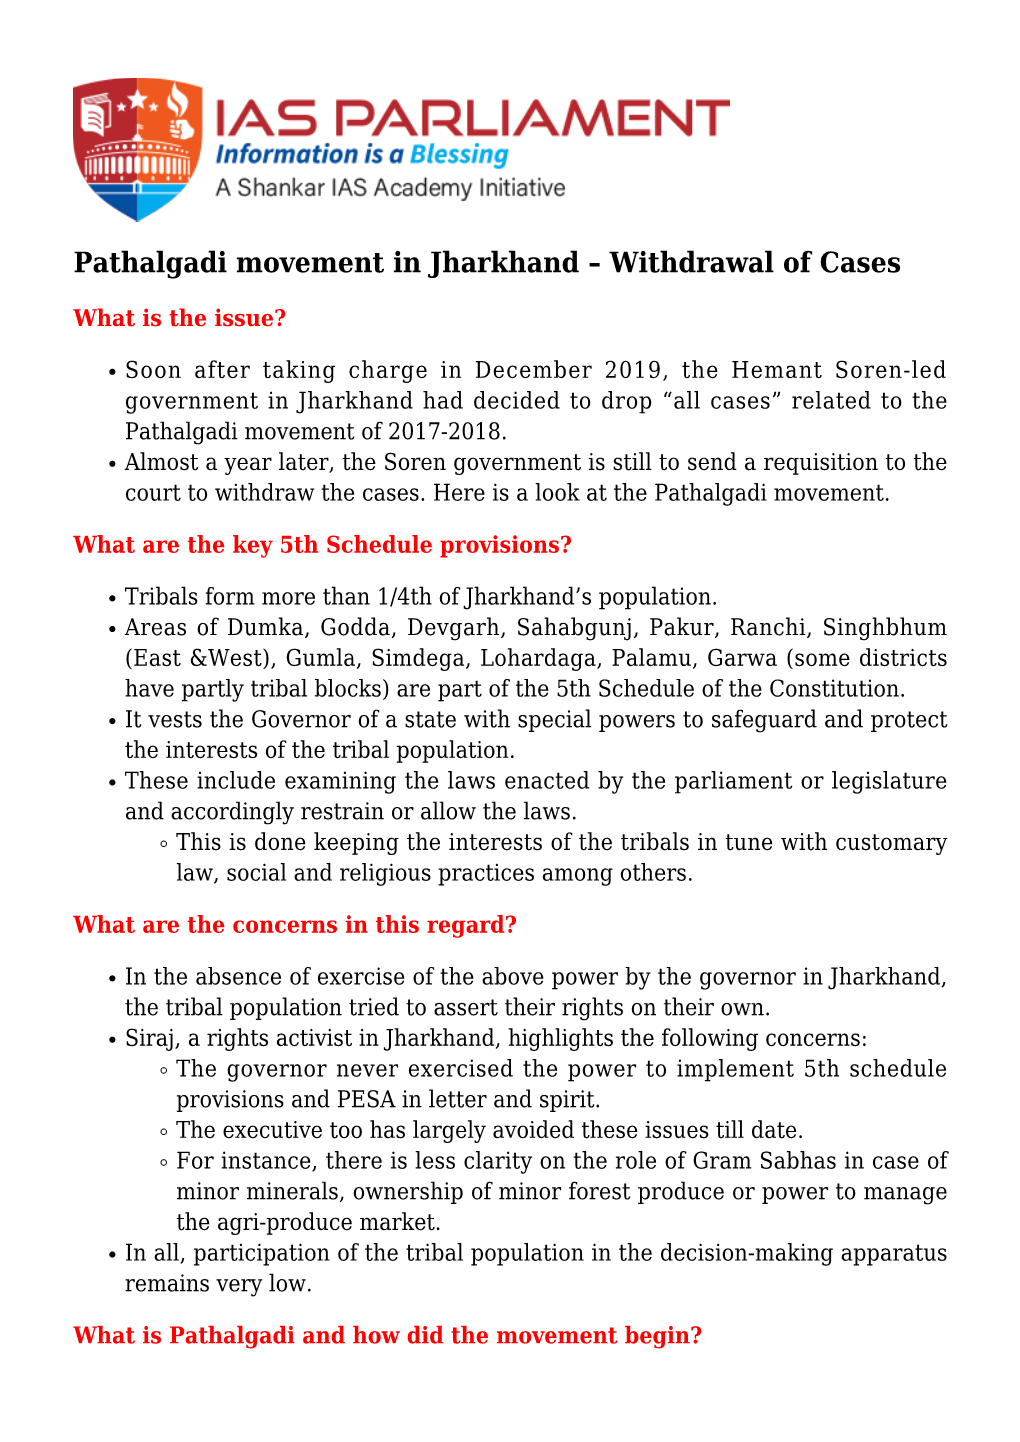 Pathalgadi Movement in Jharkhand – Withdrawal of Cases